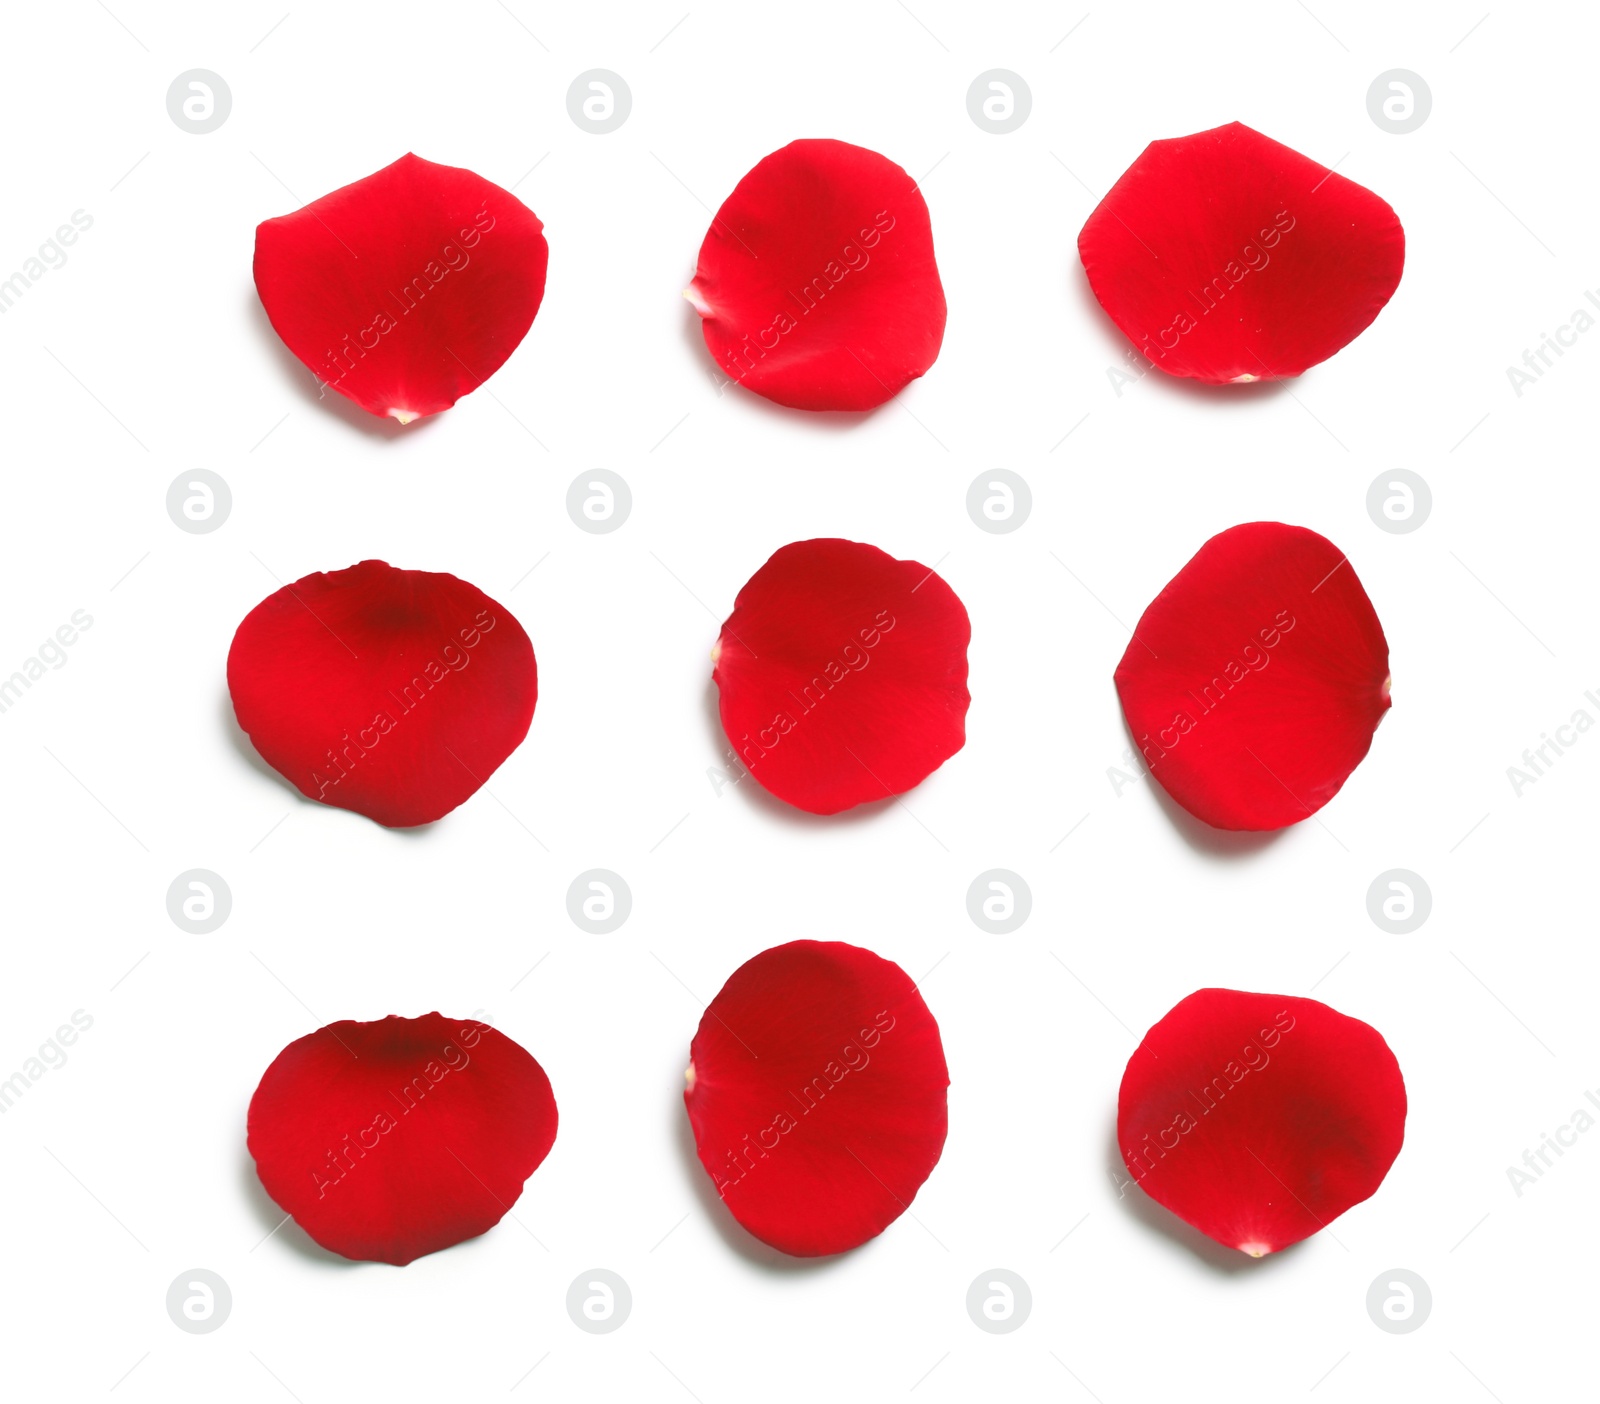 Photo of Fresh red rose petals on white background, top view